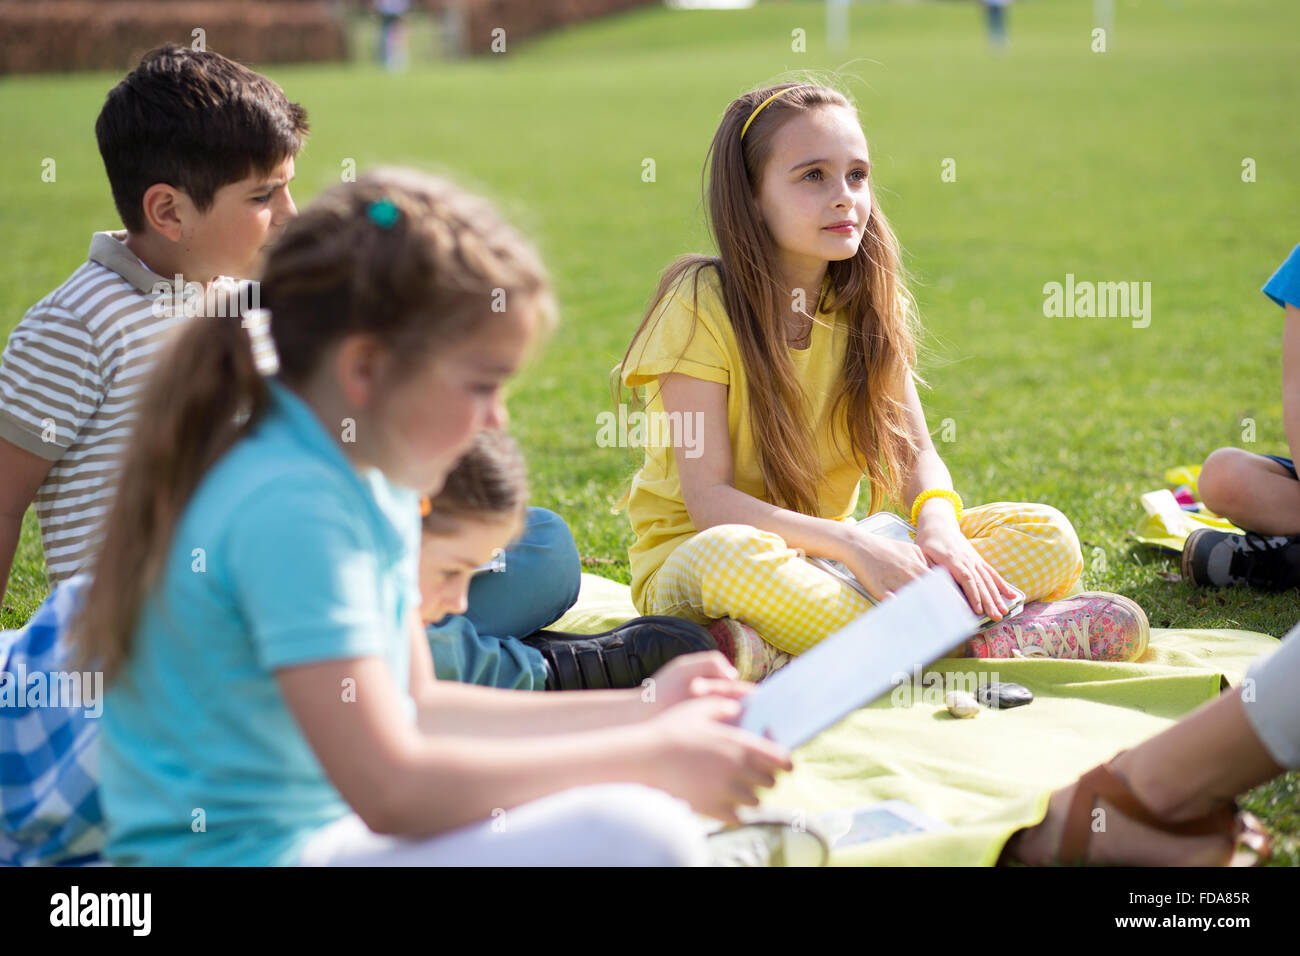 Small group of children sitting on the grass having a lesson outdoors. The children look to be listening and enjoying themself. Stock Photo